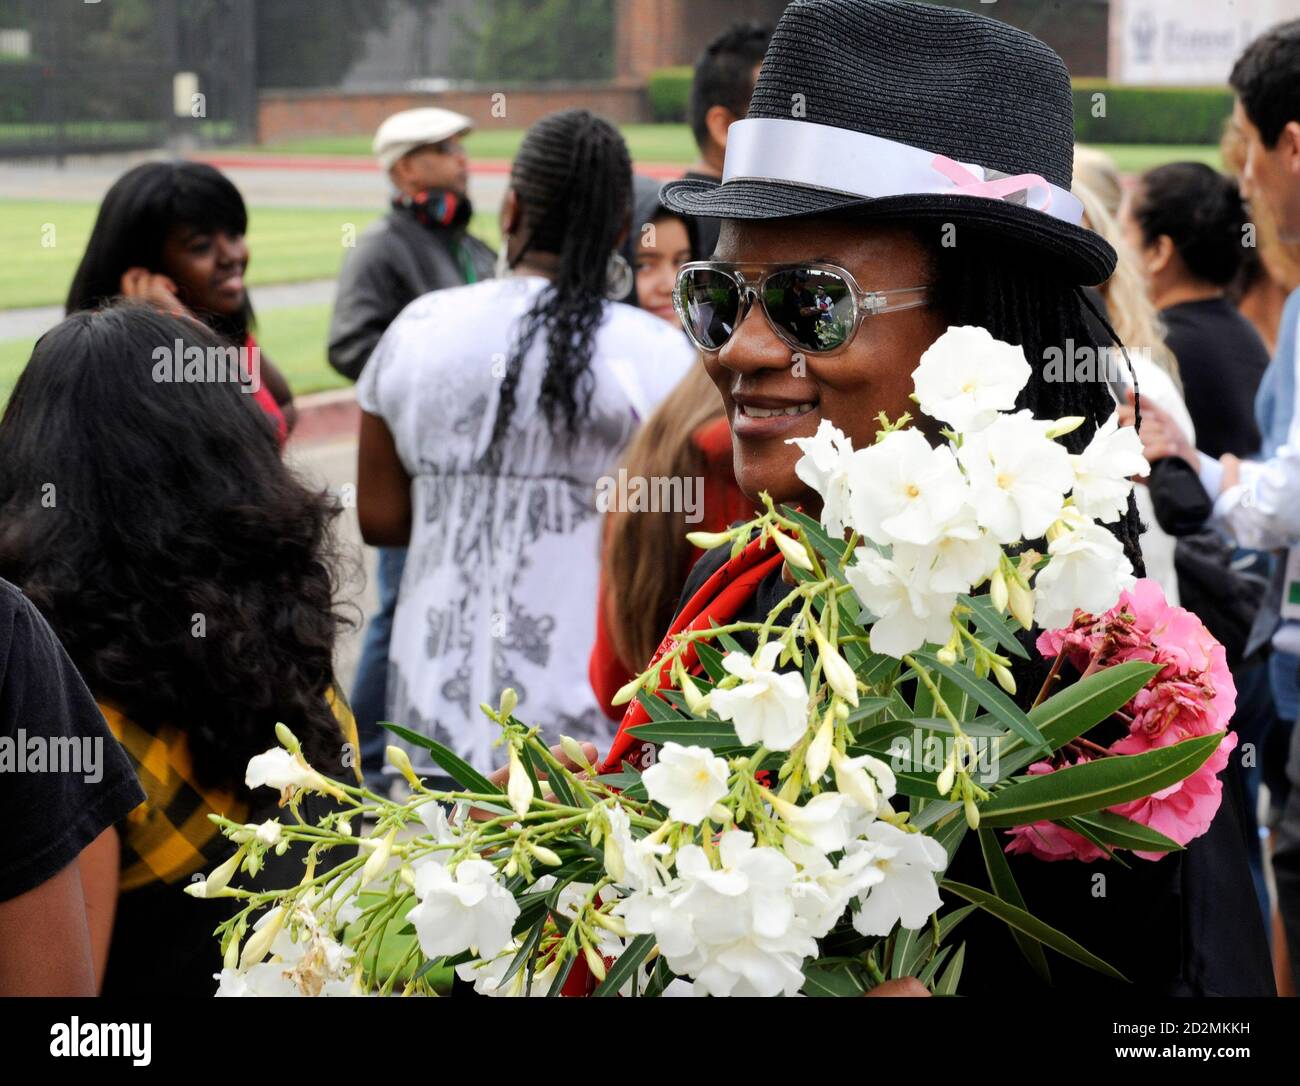 Brie Smyth of Oceanside, California, waits to pay tribute to the late pop  star Michael Jackson a year after his death at his grave site at Forest  Lawn Memorial Parks and Mortuaries